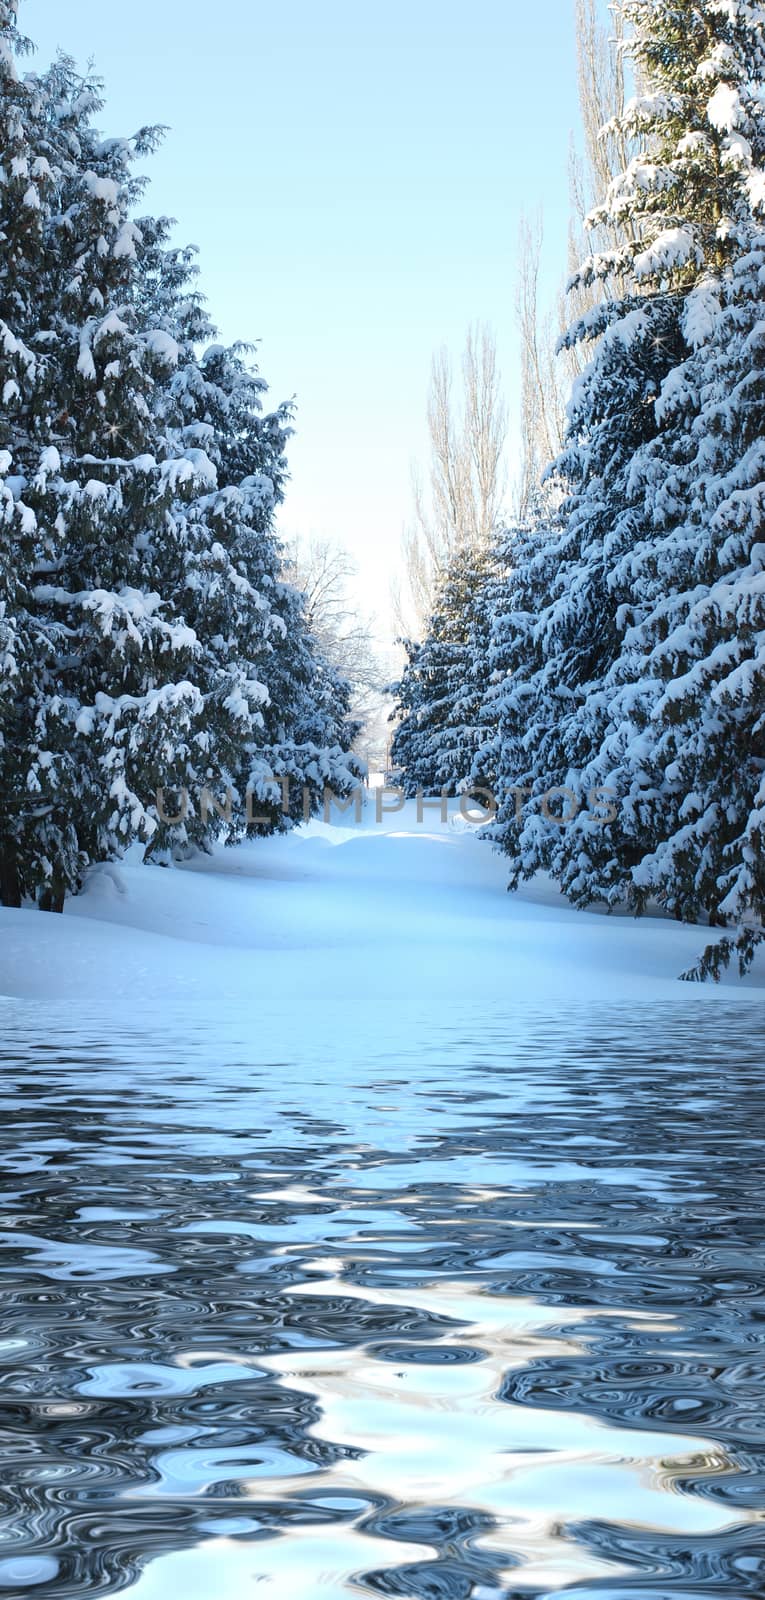 Snow-covered spruce alley on a sunny winter day reflected in the water surface with small waves